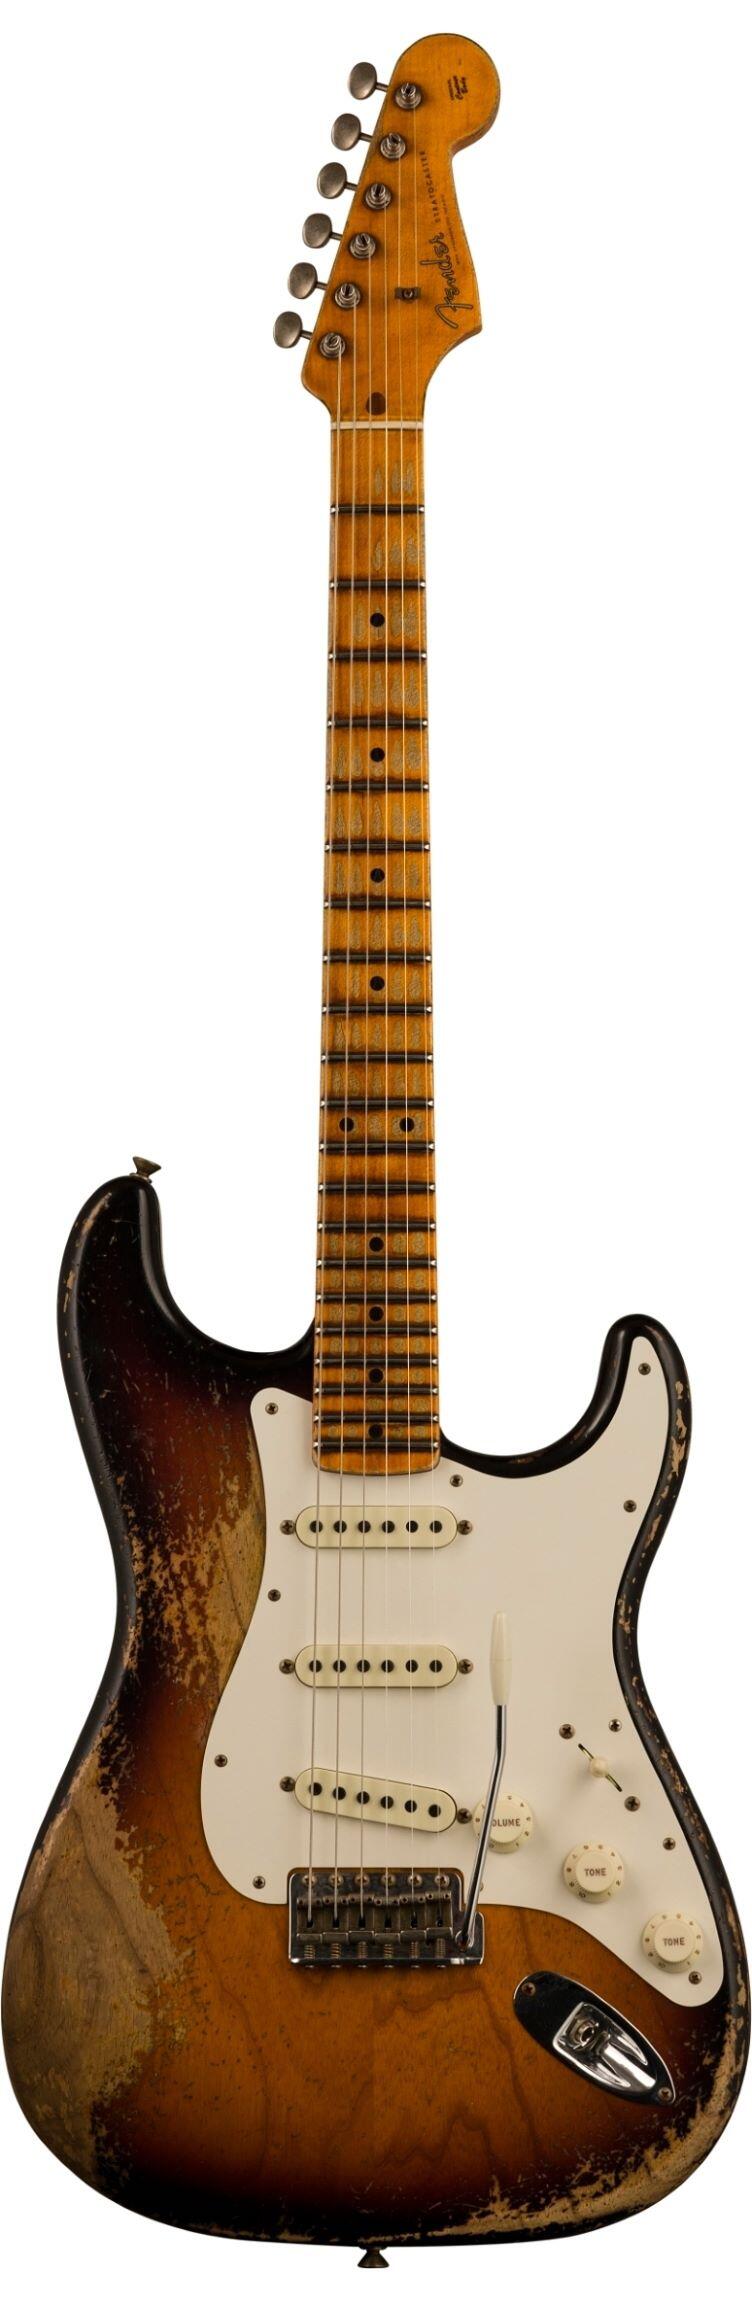 Fender Custom Shop Limited Edition Red Hot Stratocaster - Super Heavy Relic, Faded Chocolate 3-Color Sunburst : photo 1